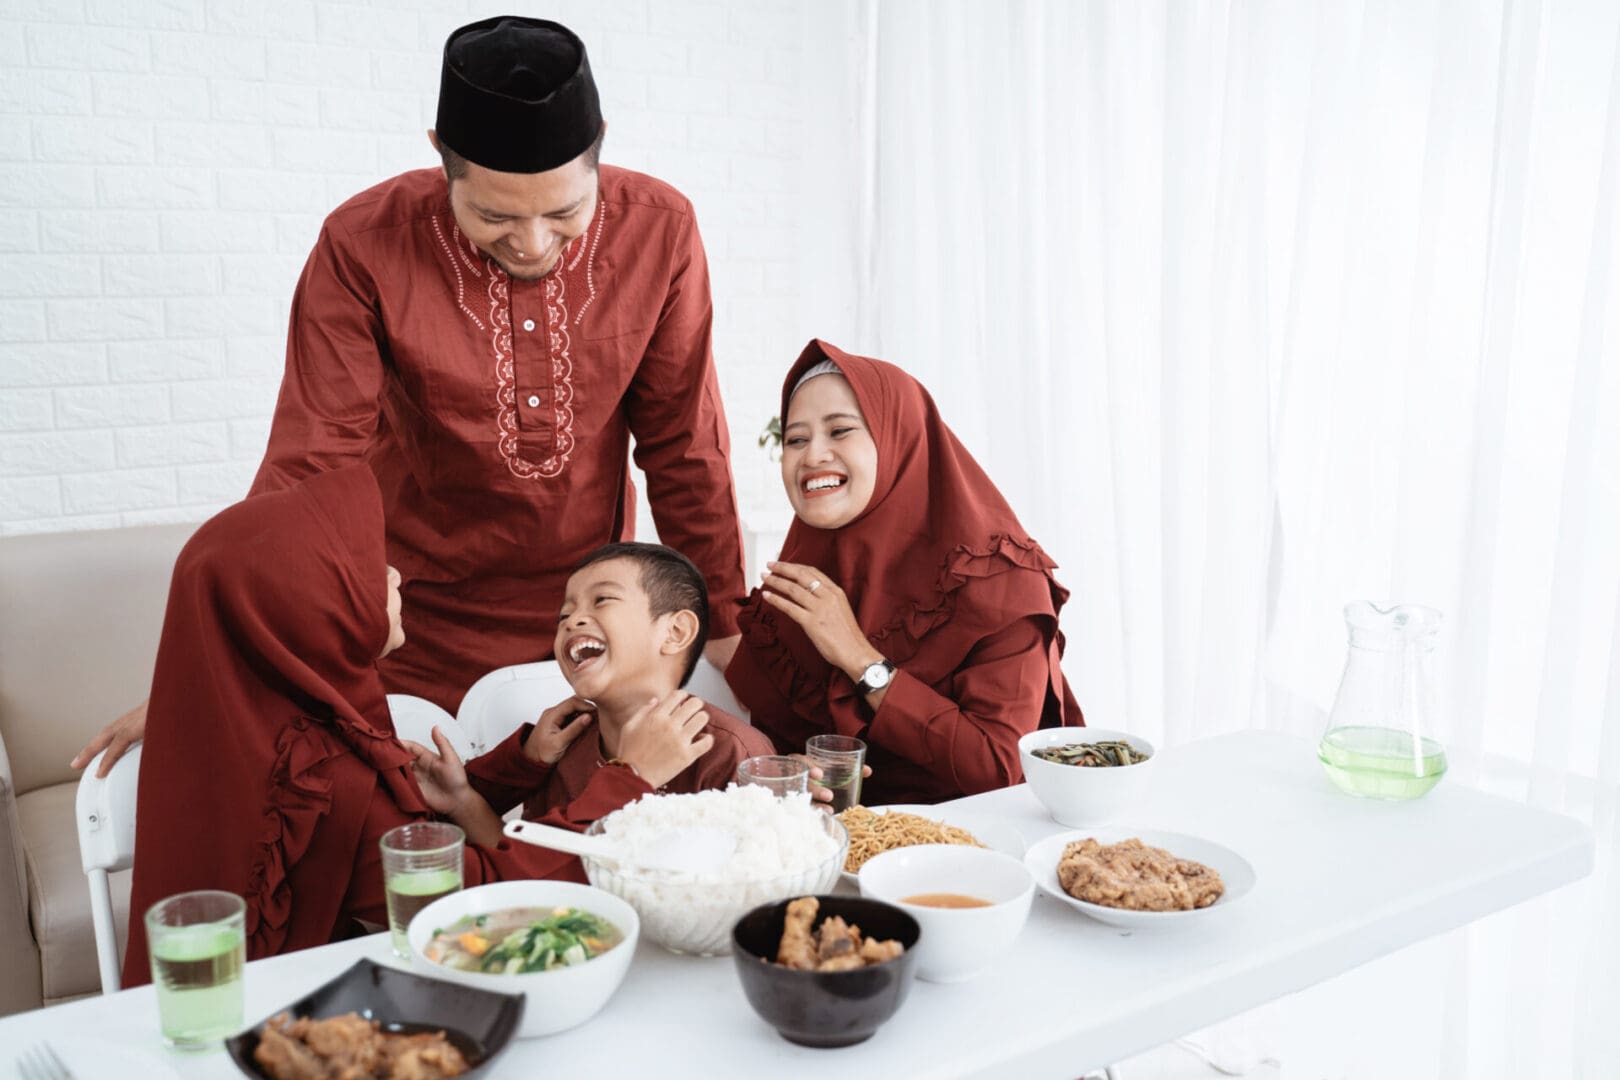 A family dressed in red traditional attire sharing a joyful moment around a dining table with Eid food.